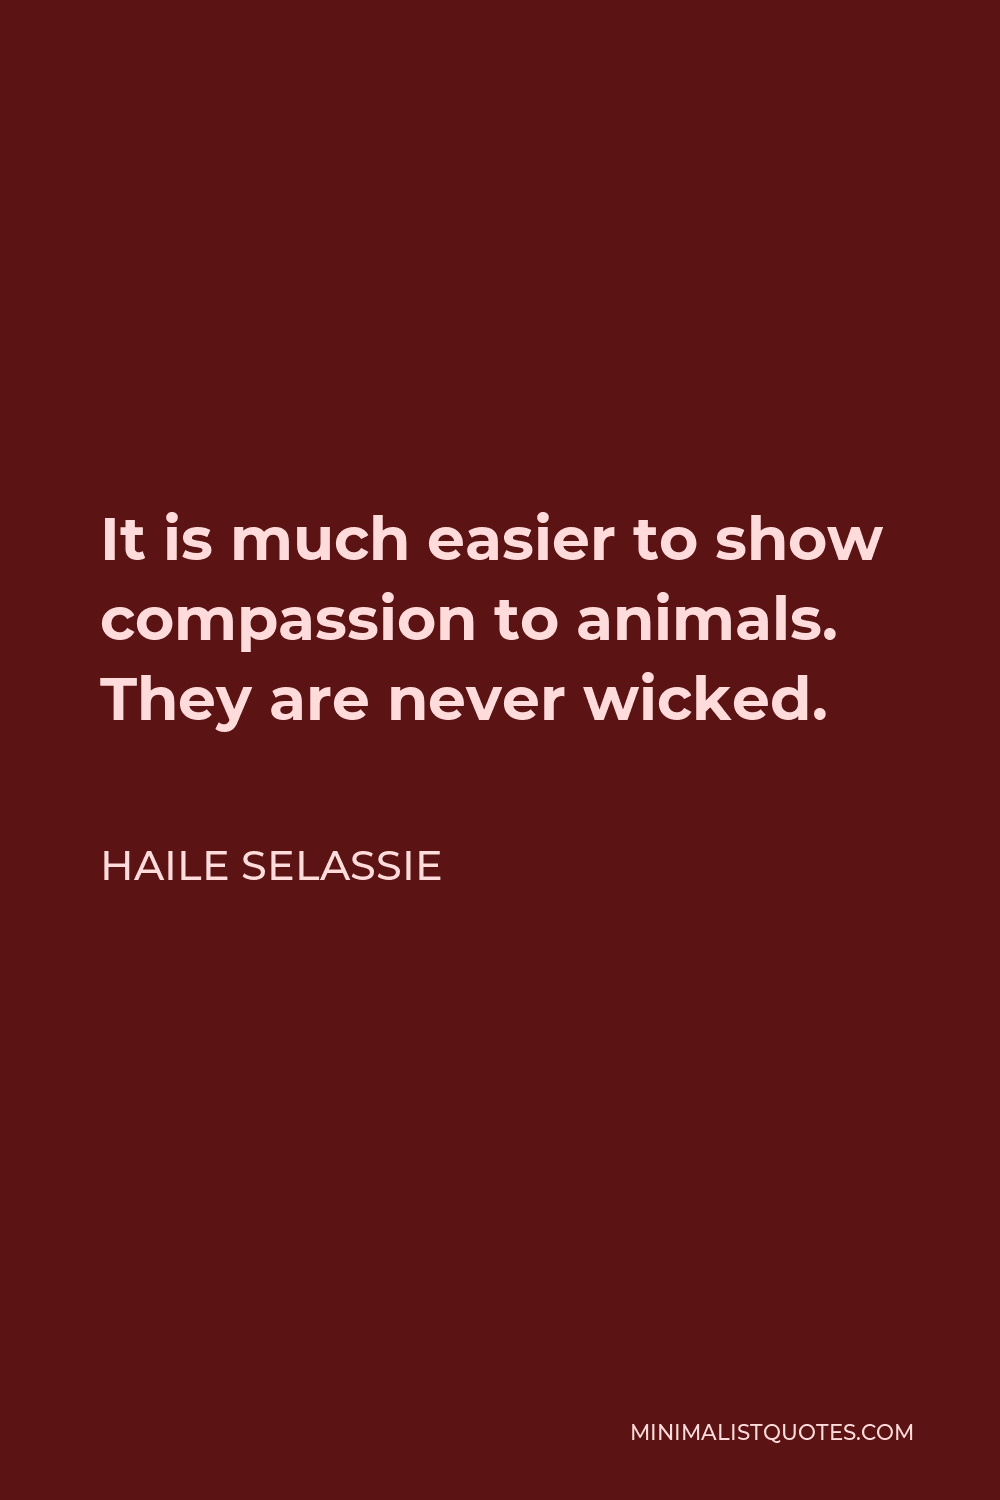 Haile Selassie Quote - It is much easier to show compassion to animals. They are never wicked.